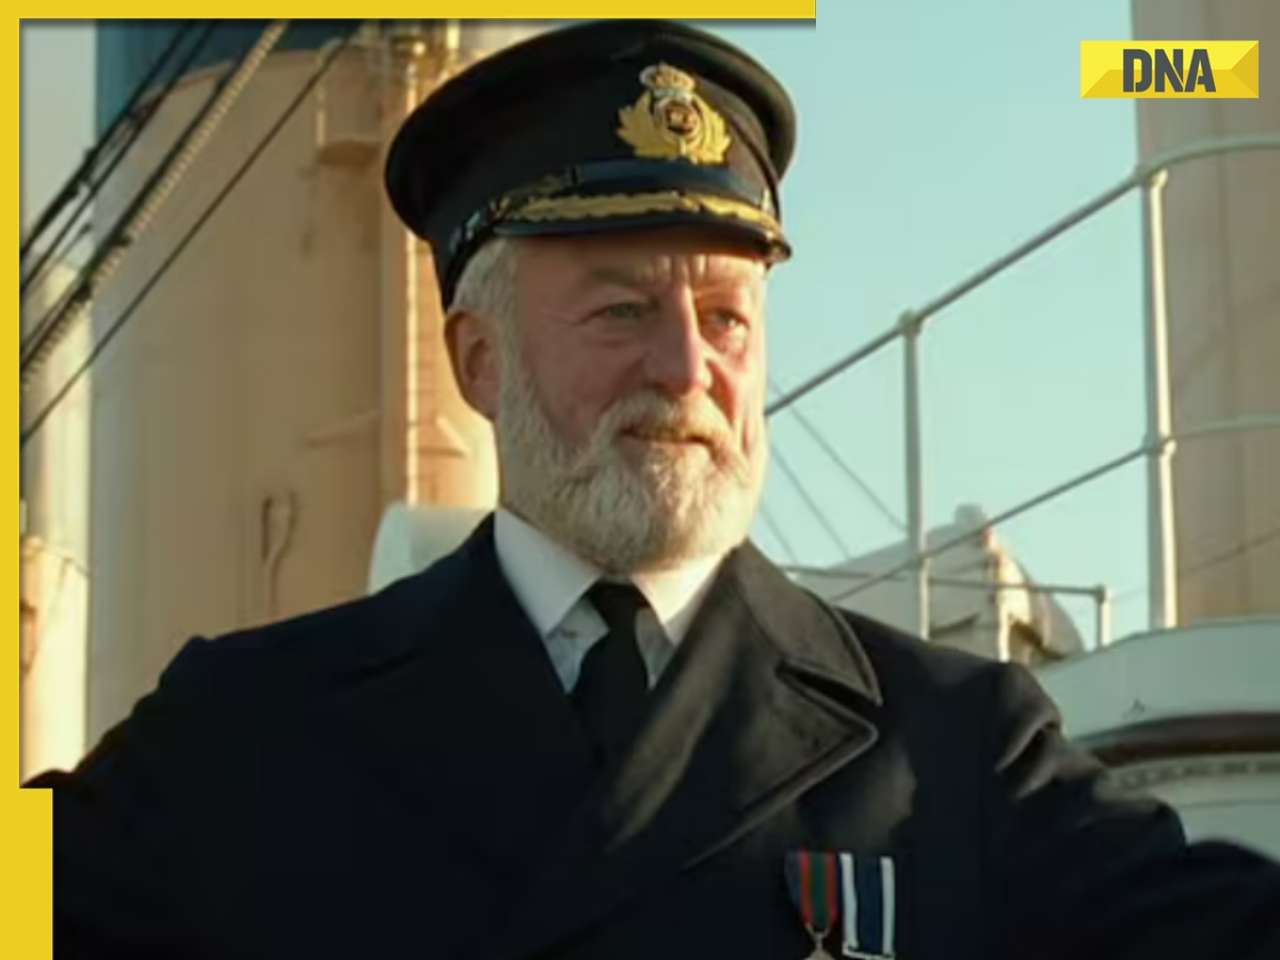 Bernard Hill, Titanic, The Lord of the Rings actor, passes away at 79